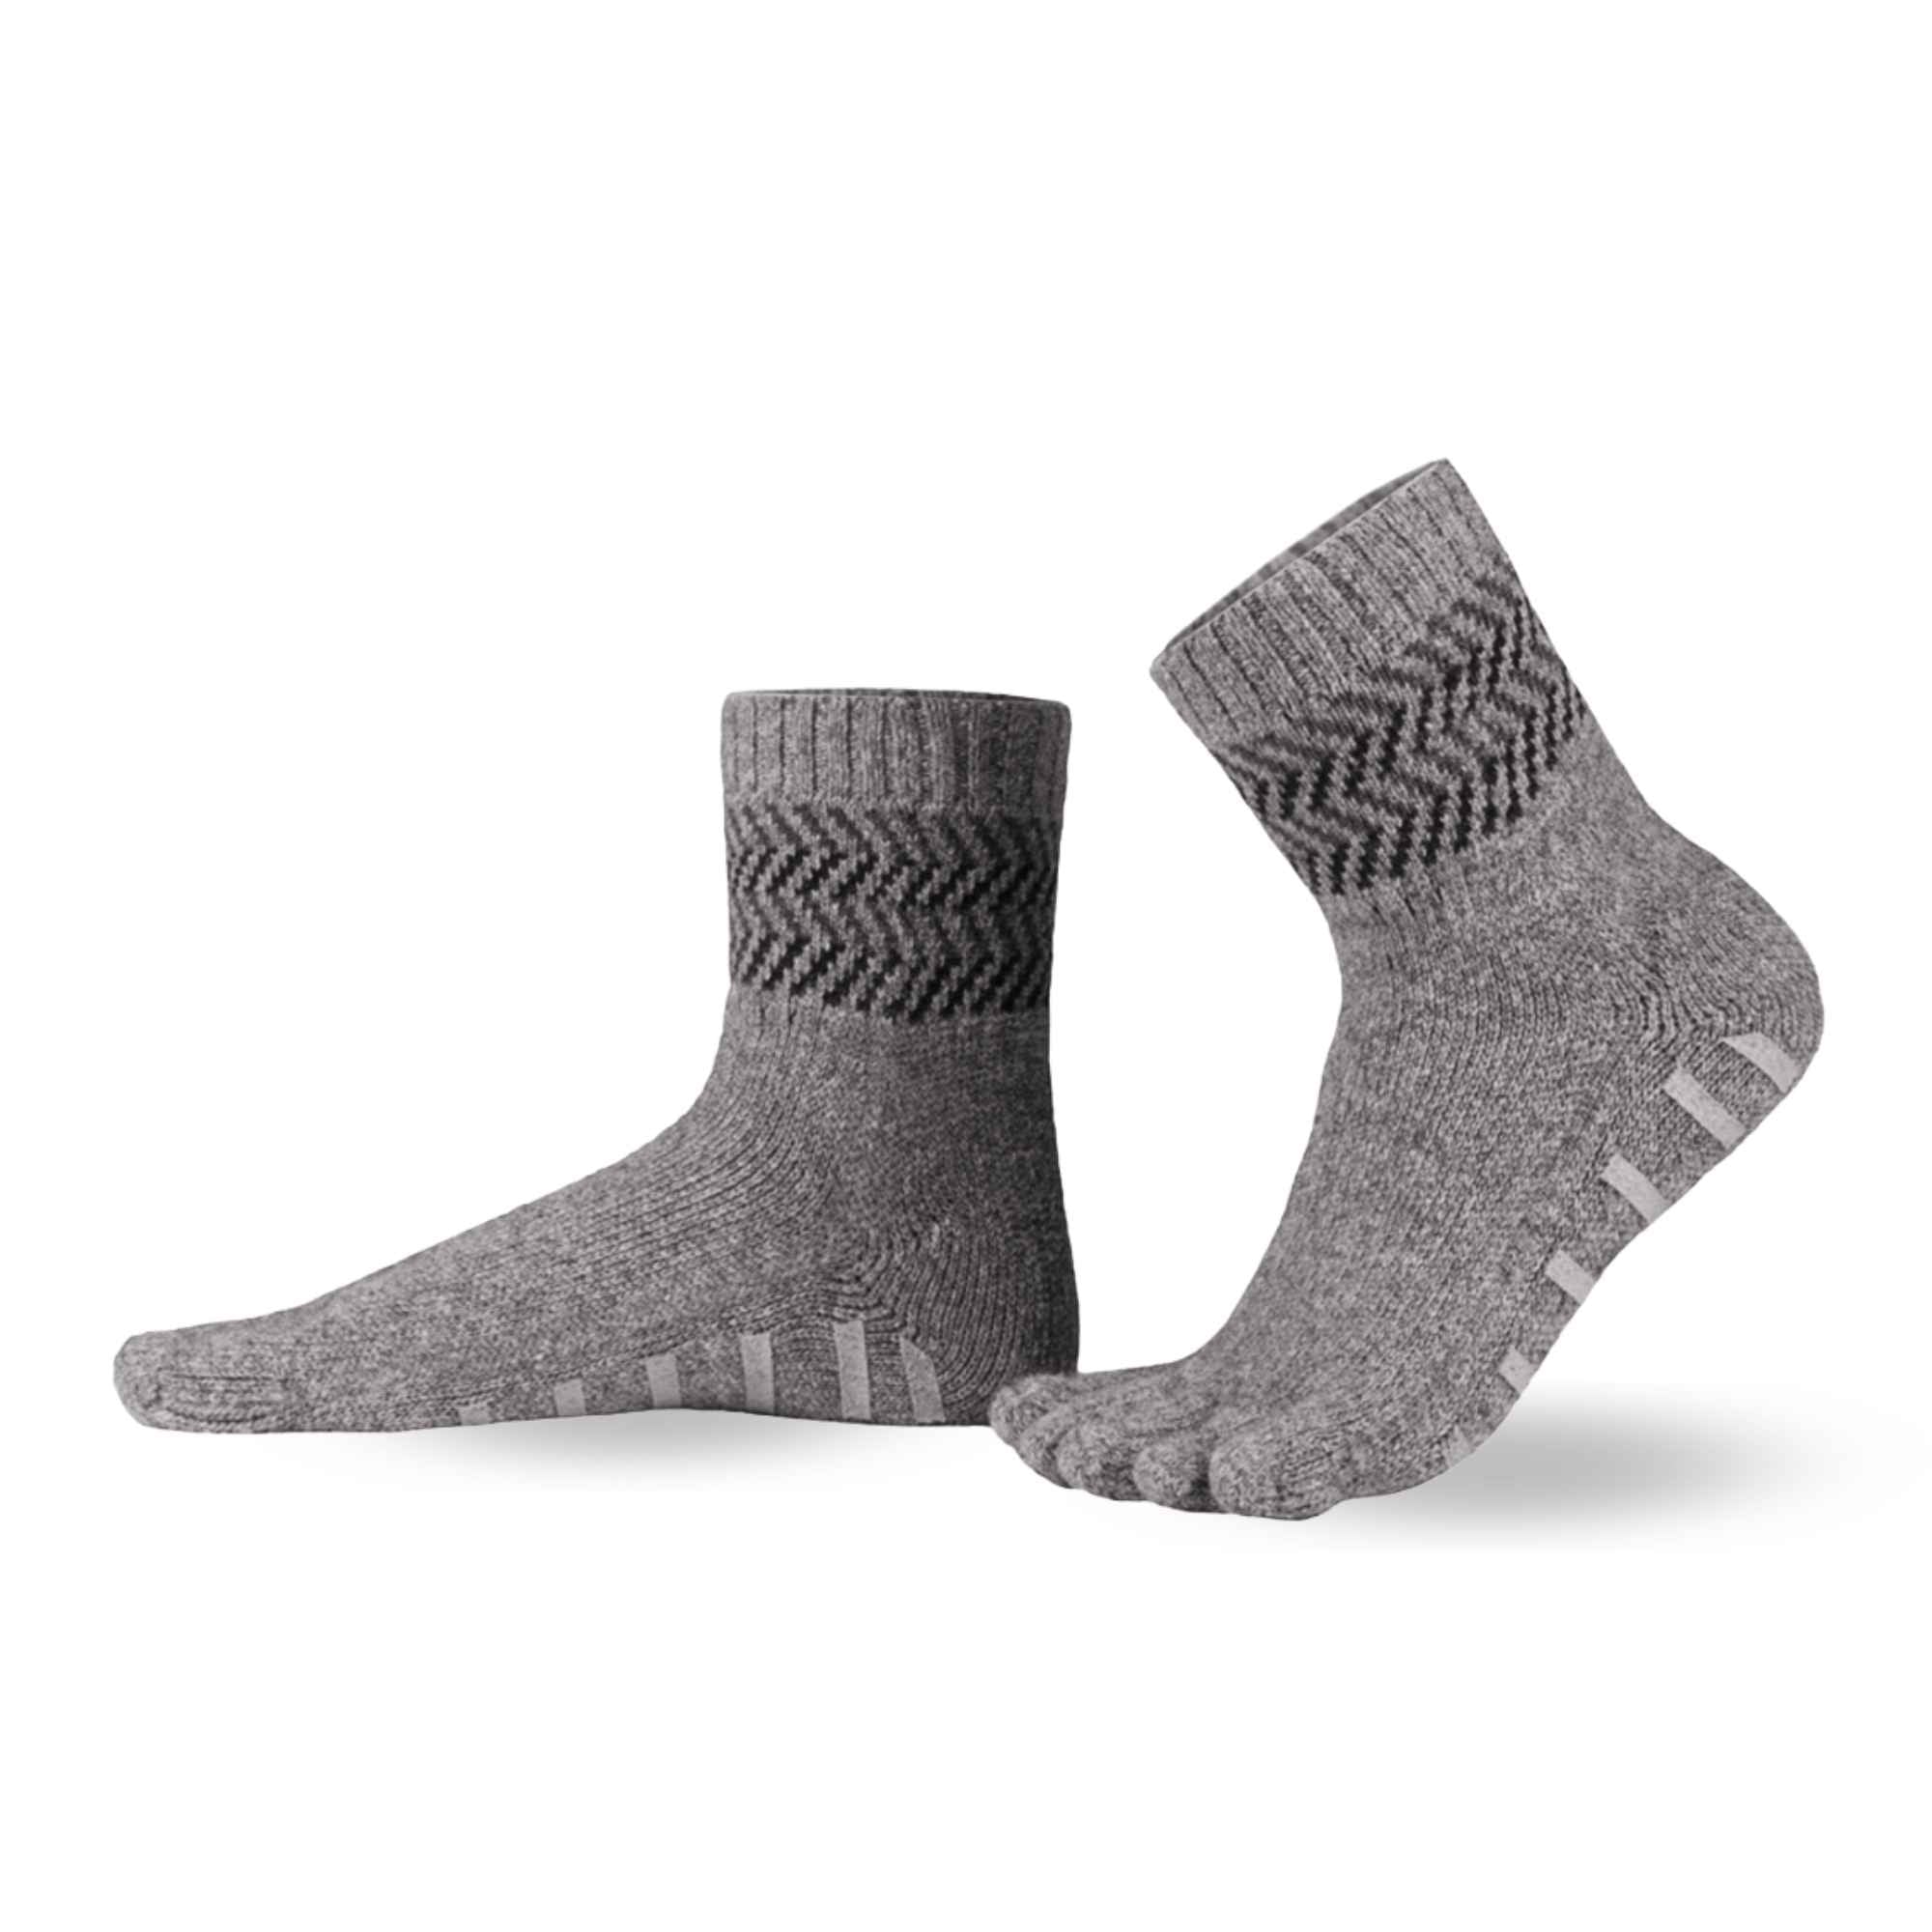 Knitido Home Cashmere and merino socks with non-slip coating - Knitido®